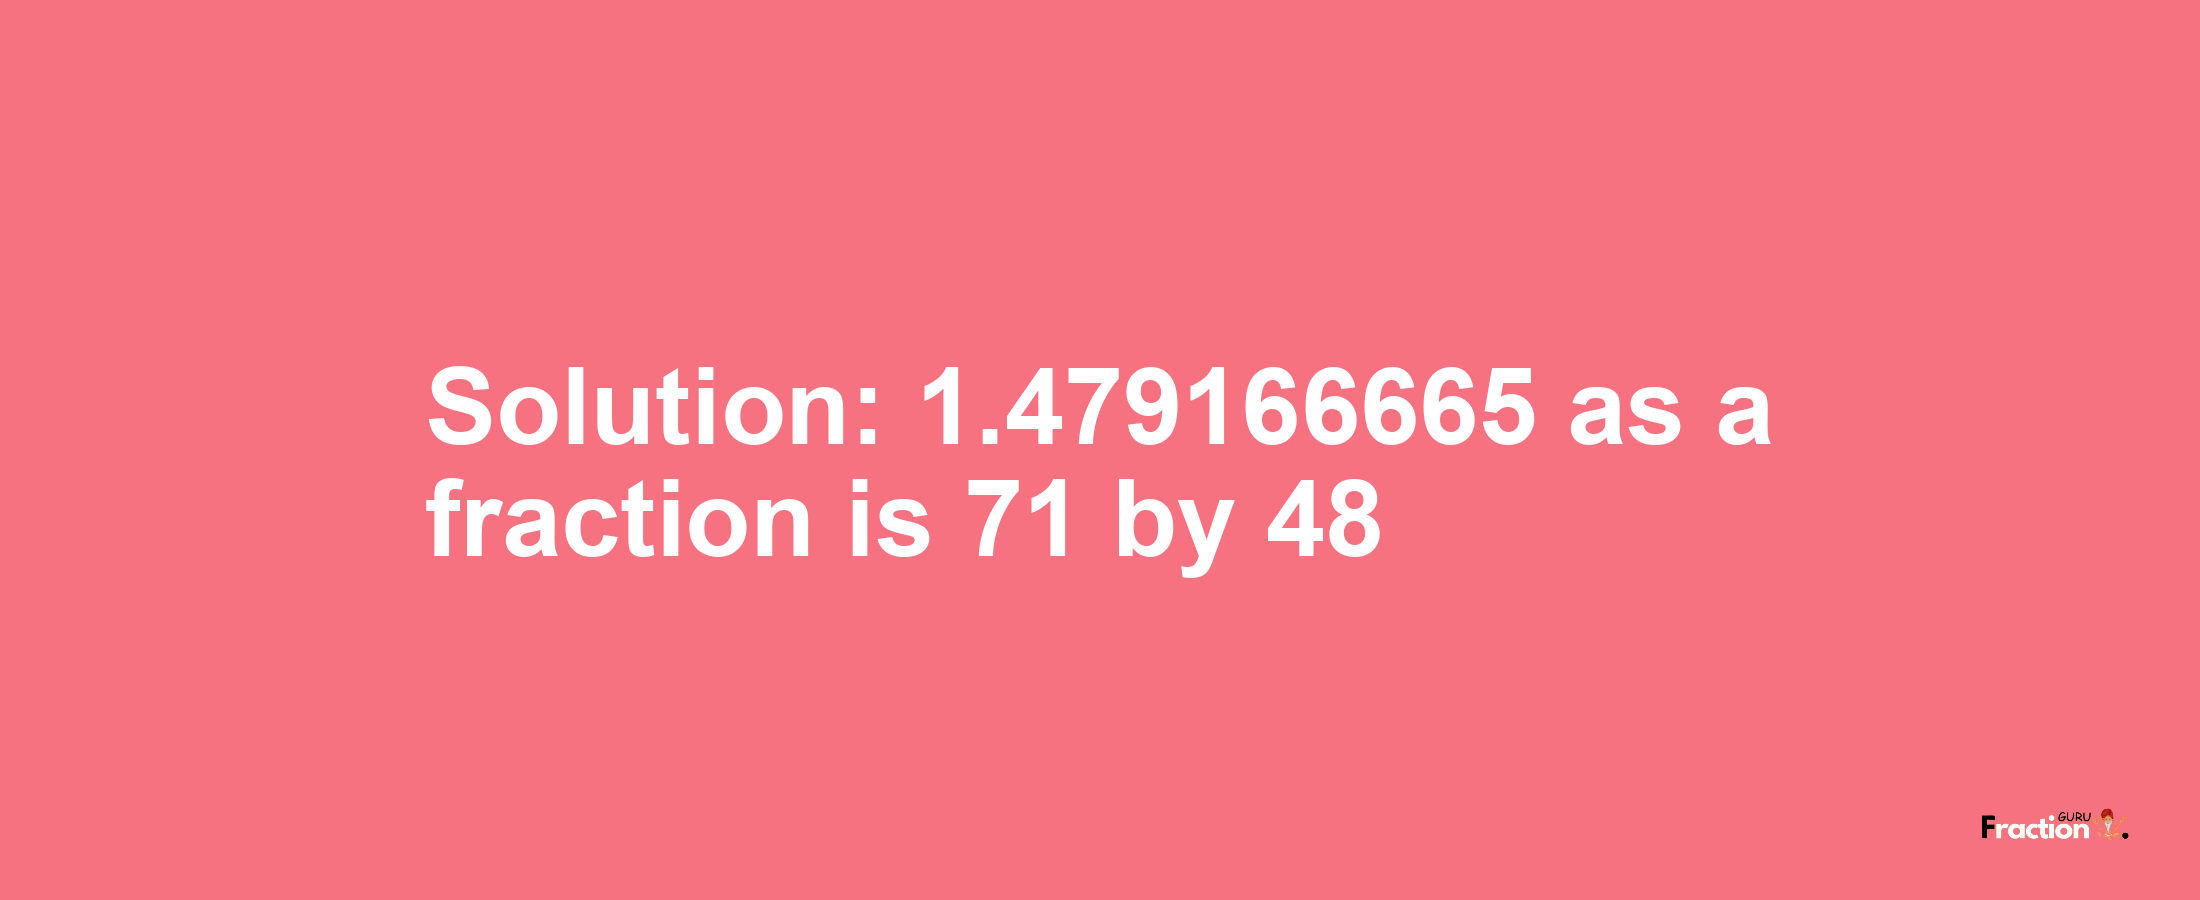 Solution:1.479166665 as a fraction is 71/48